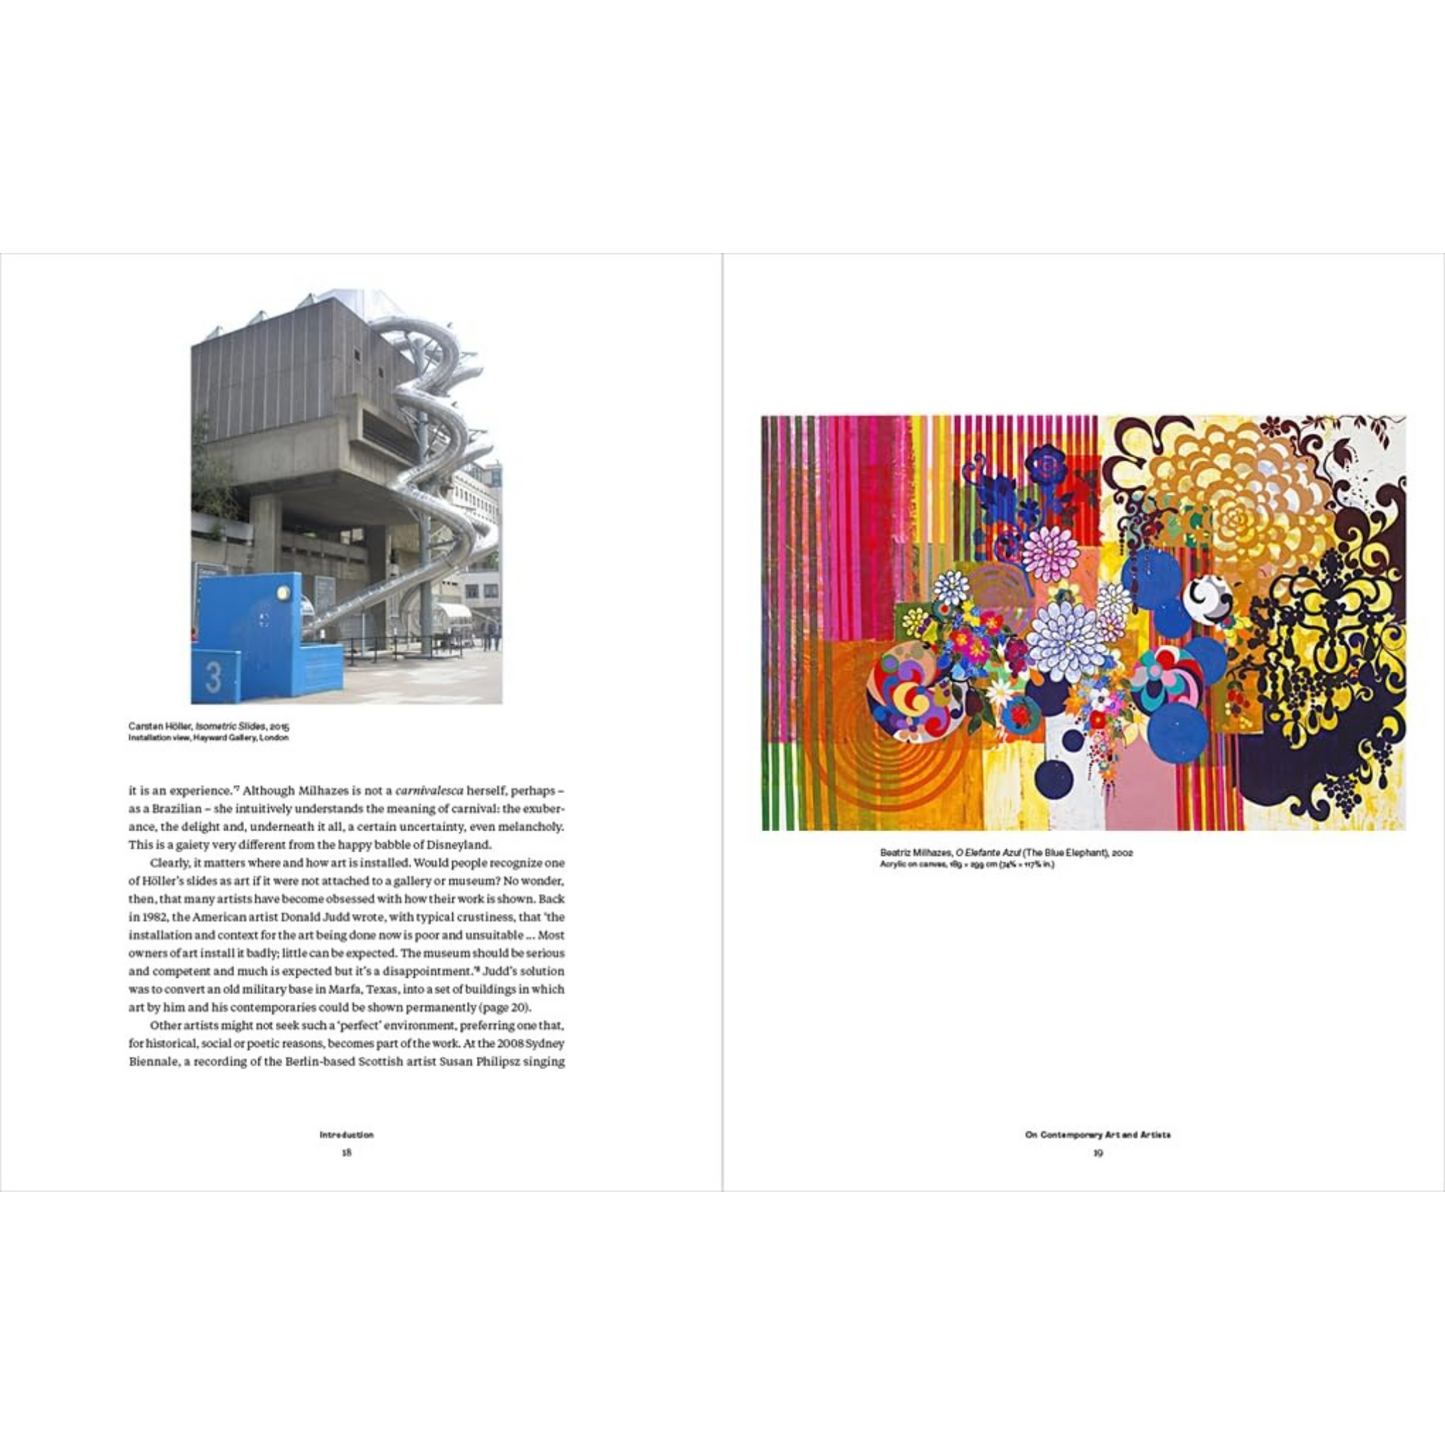 Internal pages of Story of Contemporary Art featuring a painting and photo of the Hayward Gallery with Carsten Holler slides.